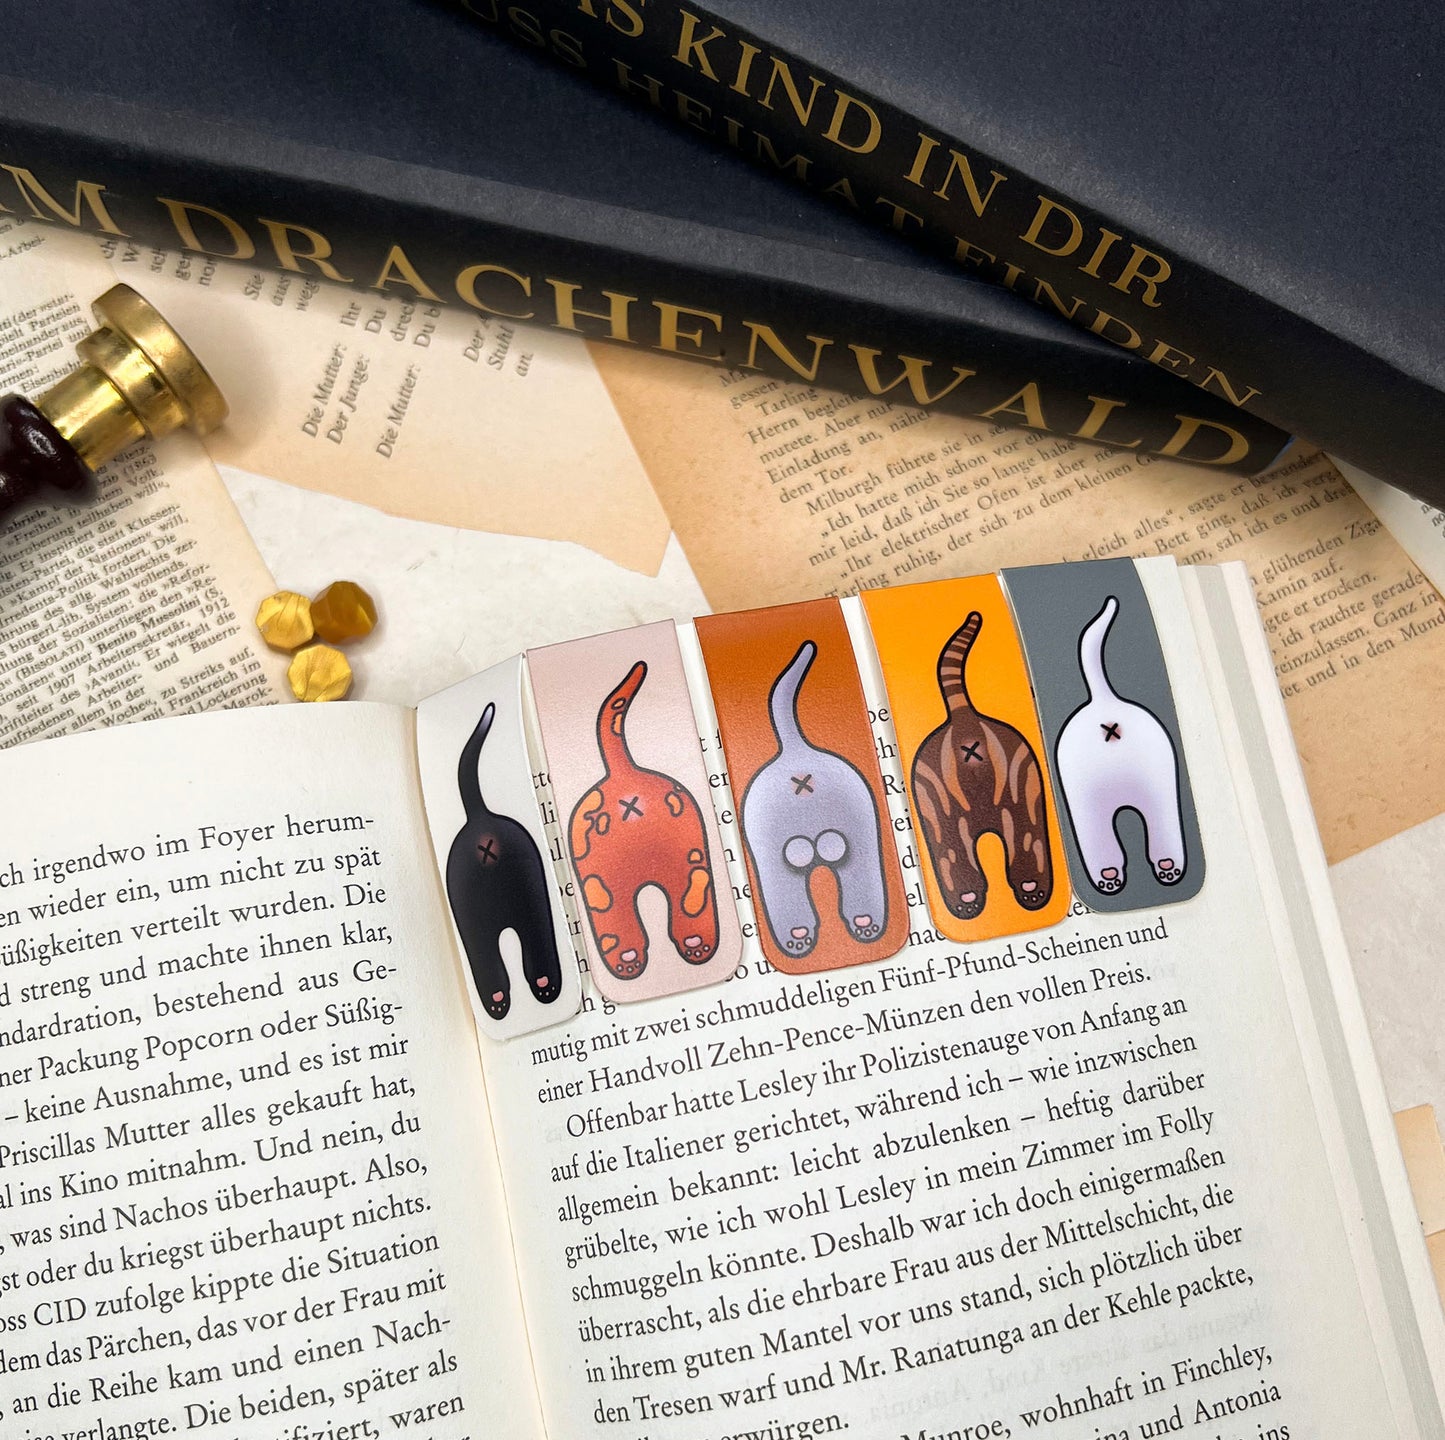 Cat Butt - Magnetic Bookmarks